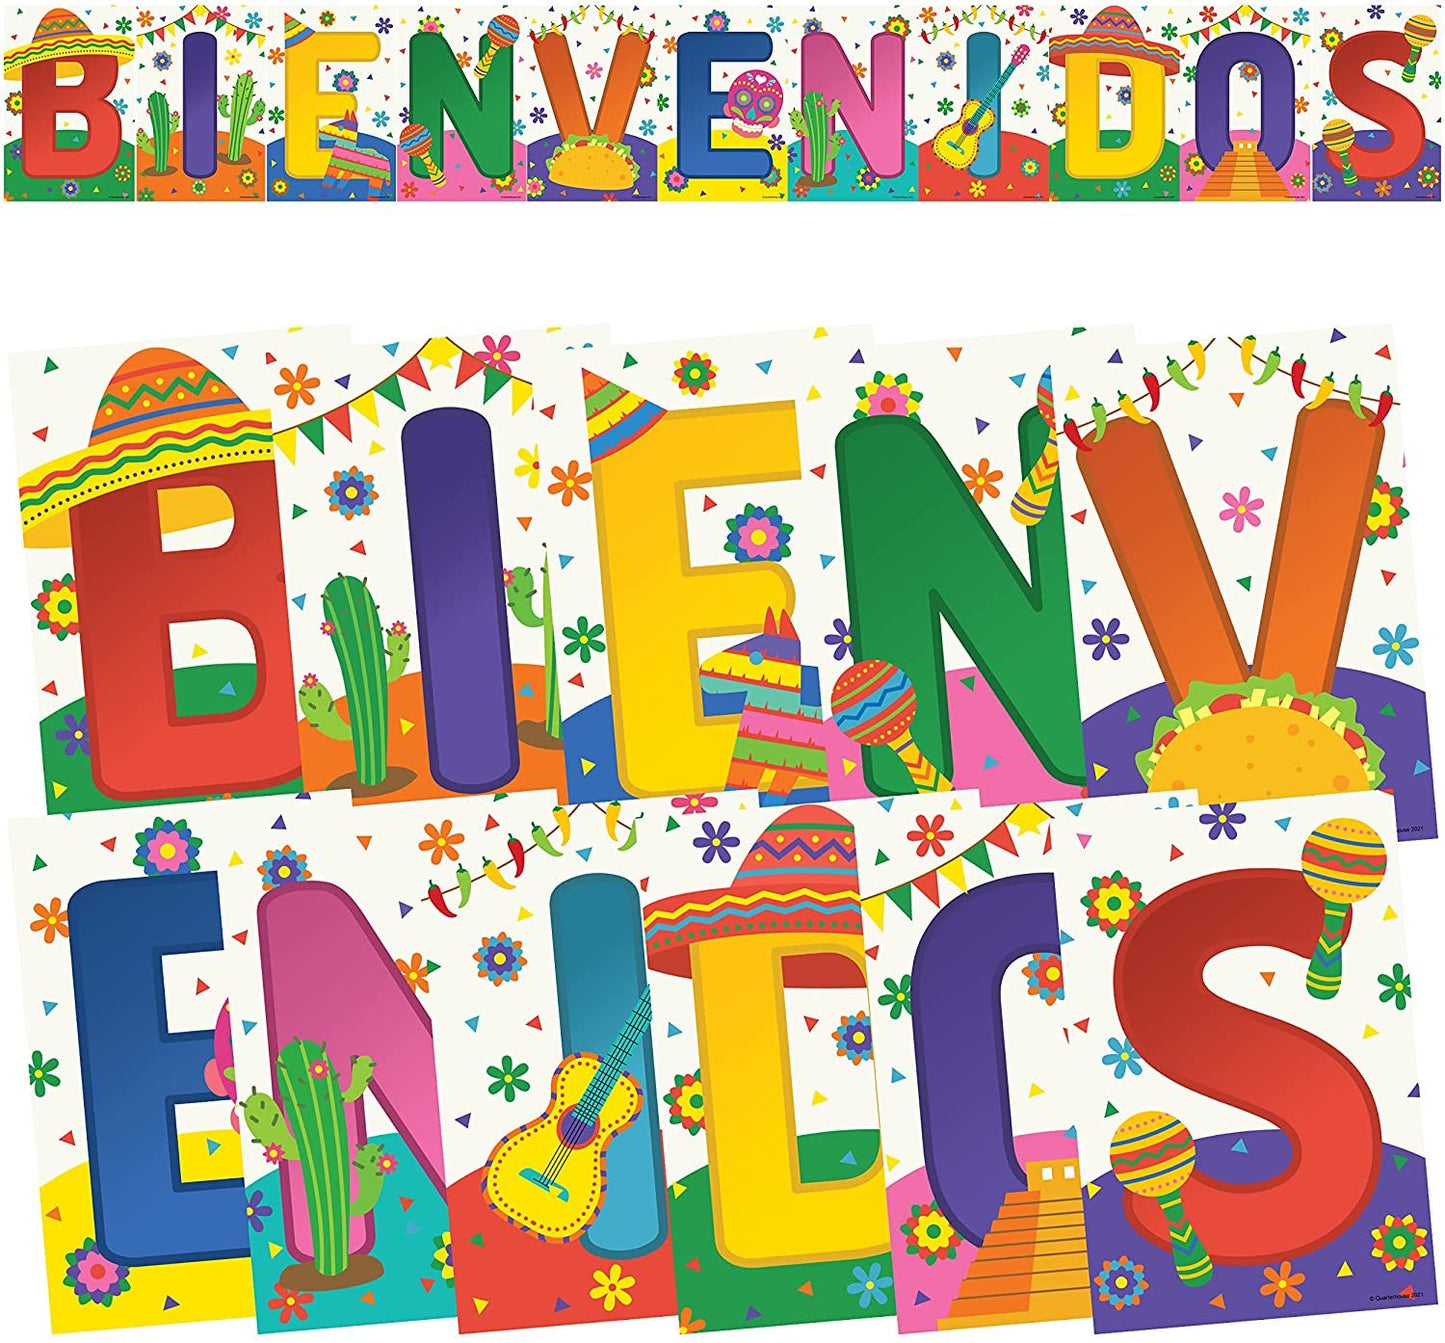 Quarterhouse Bienvenidos Welcome Poster Set, Spanish - ESL Classroom Learning Materials for K-12 Students and Teachers, Set of 11, 12 x 18 Inches, Extra Durable